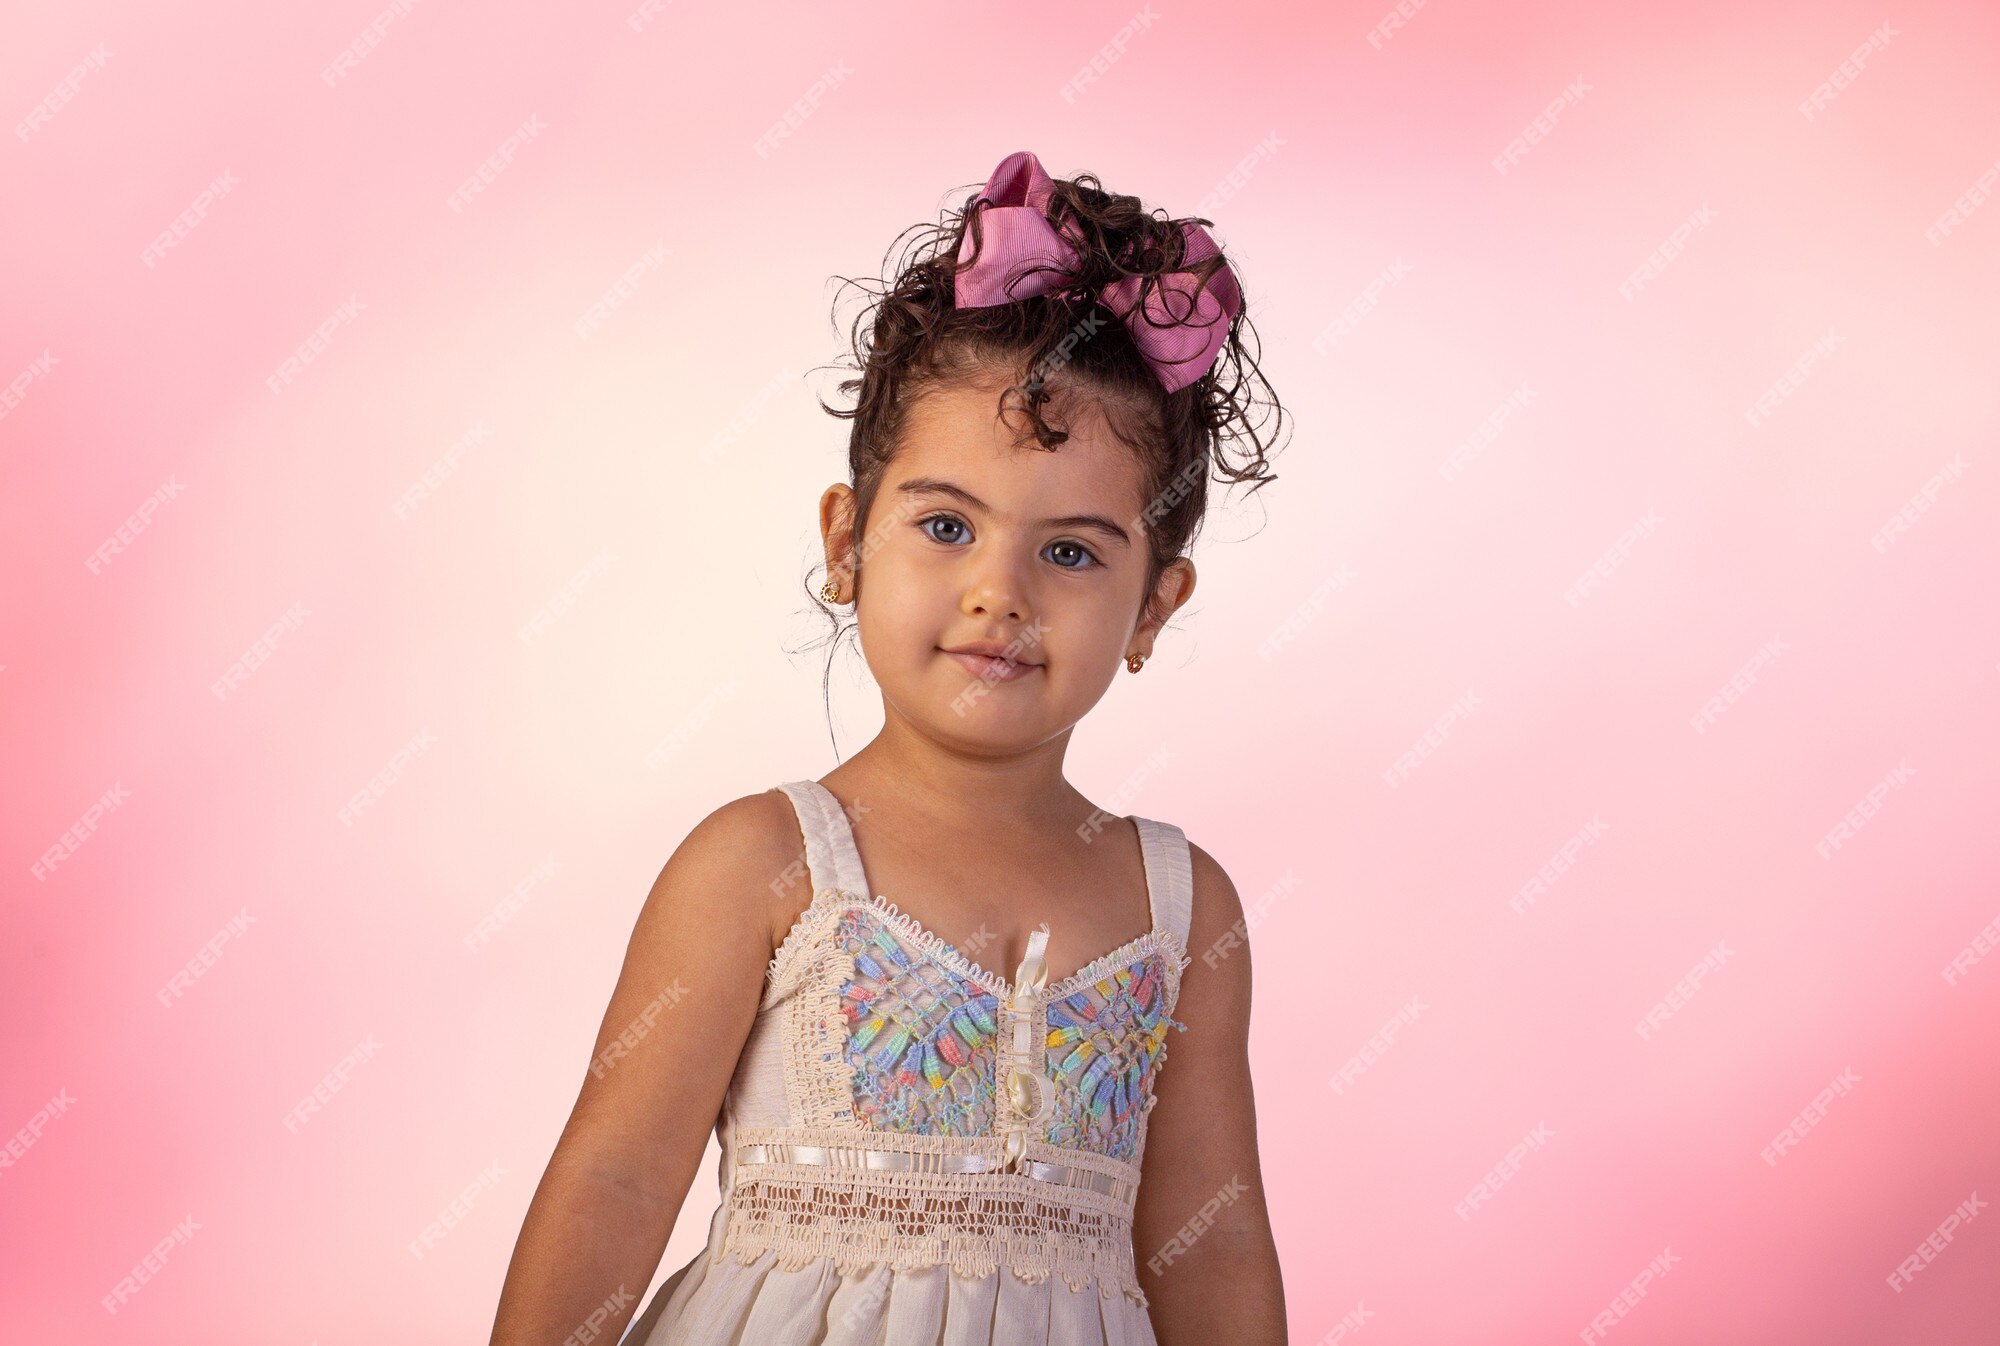 Premium Photo | Child with facial expressions in a studio photo over  colored background.